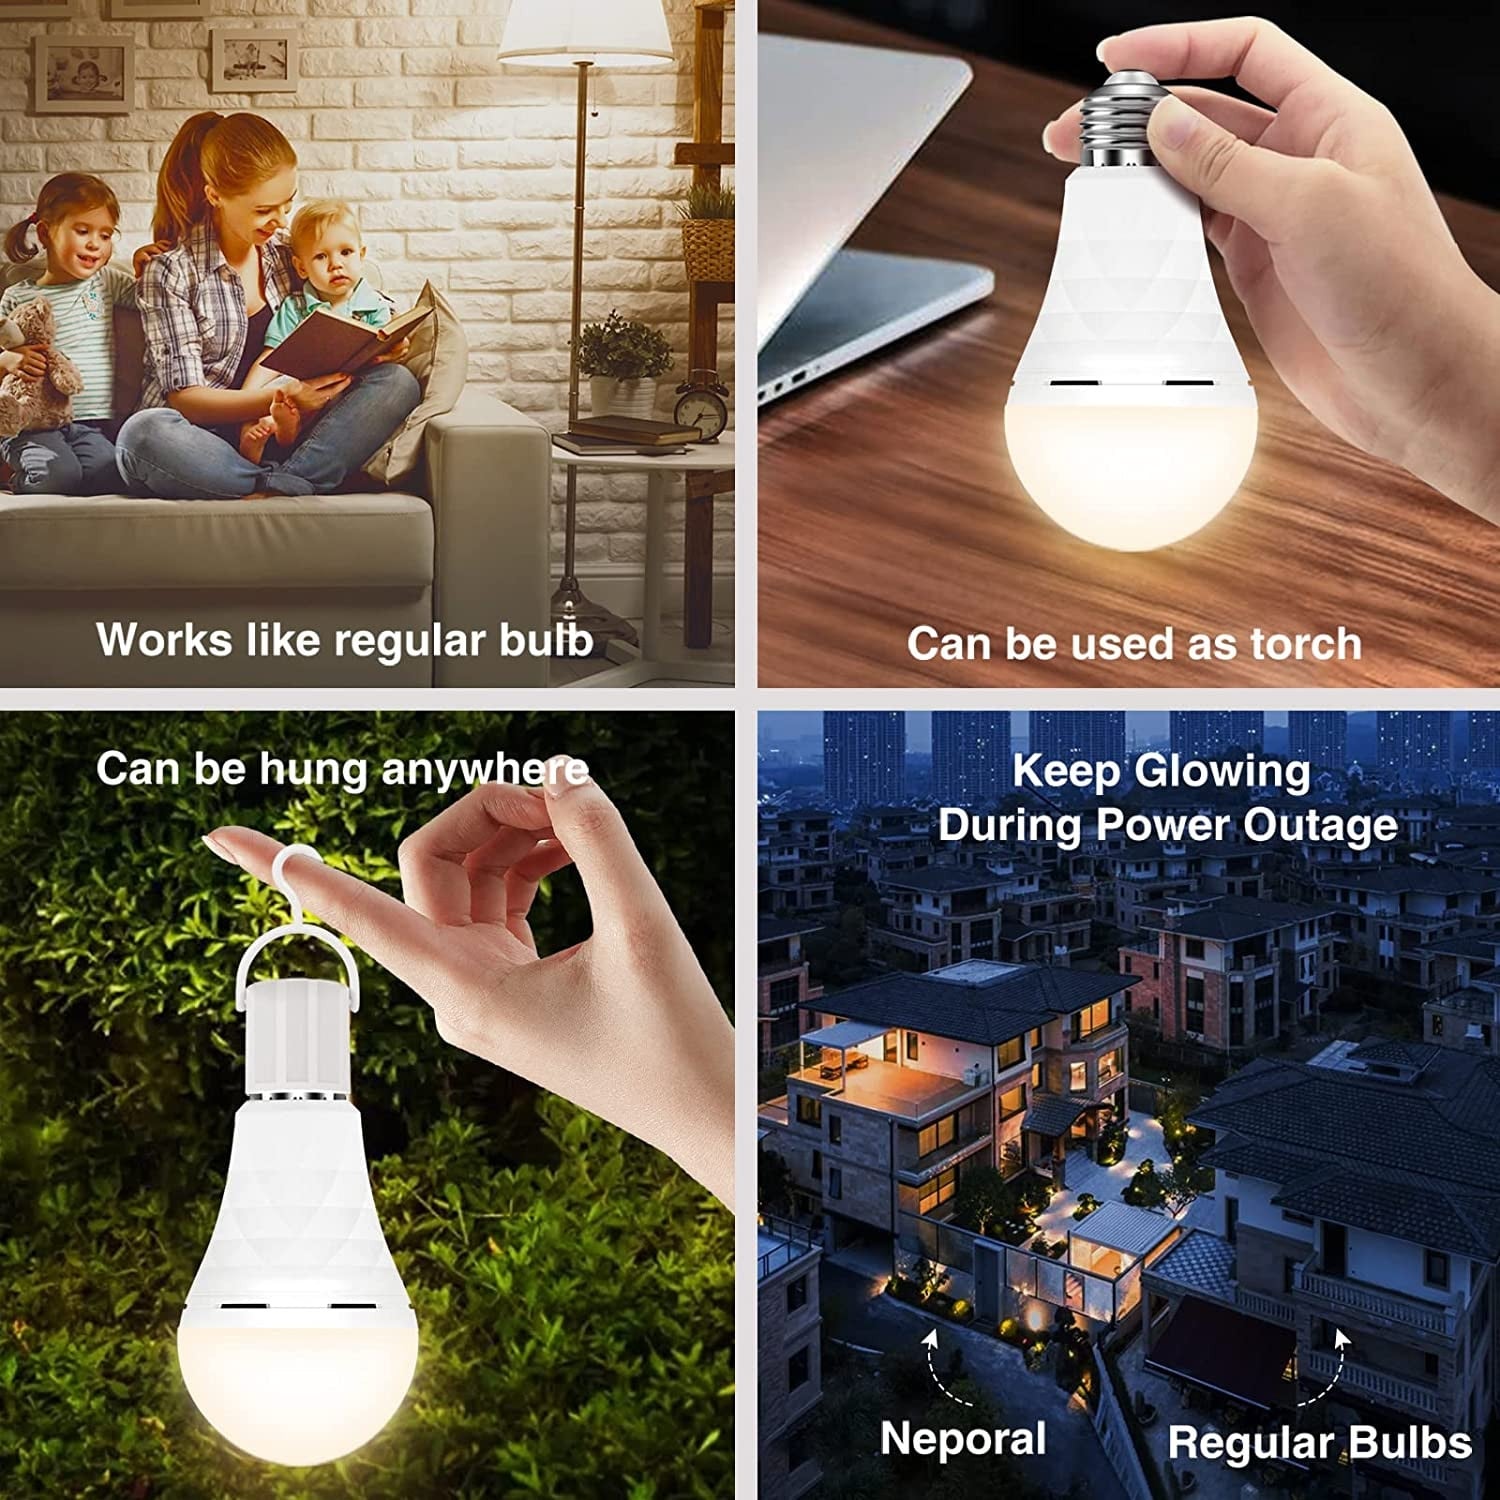 https://ak1.ostkcdn.com/images/products/is/images/direct/841a5cece8c1b1f231b4763b89ba5480517fdcbb/Pack-of-4-Rechargeable-Emergency-Light-Bulbs-Light-Bulb-for-Home-Power-Failure-12W-Equivalent-LED-Bulbs-with-Holder-Hooks.jpg